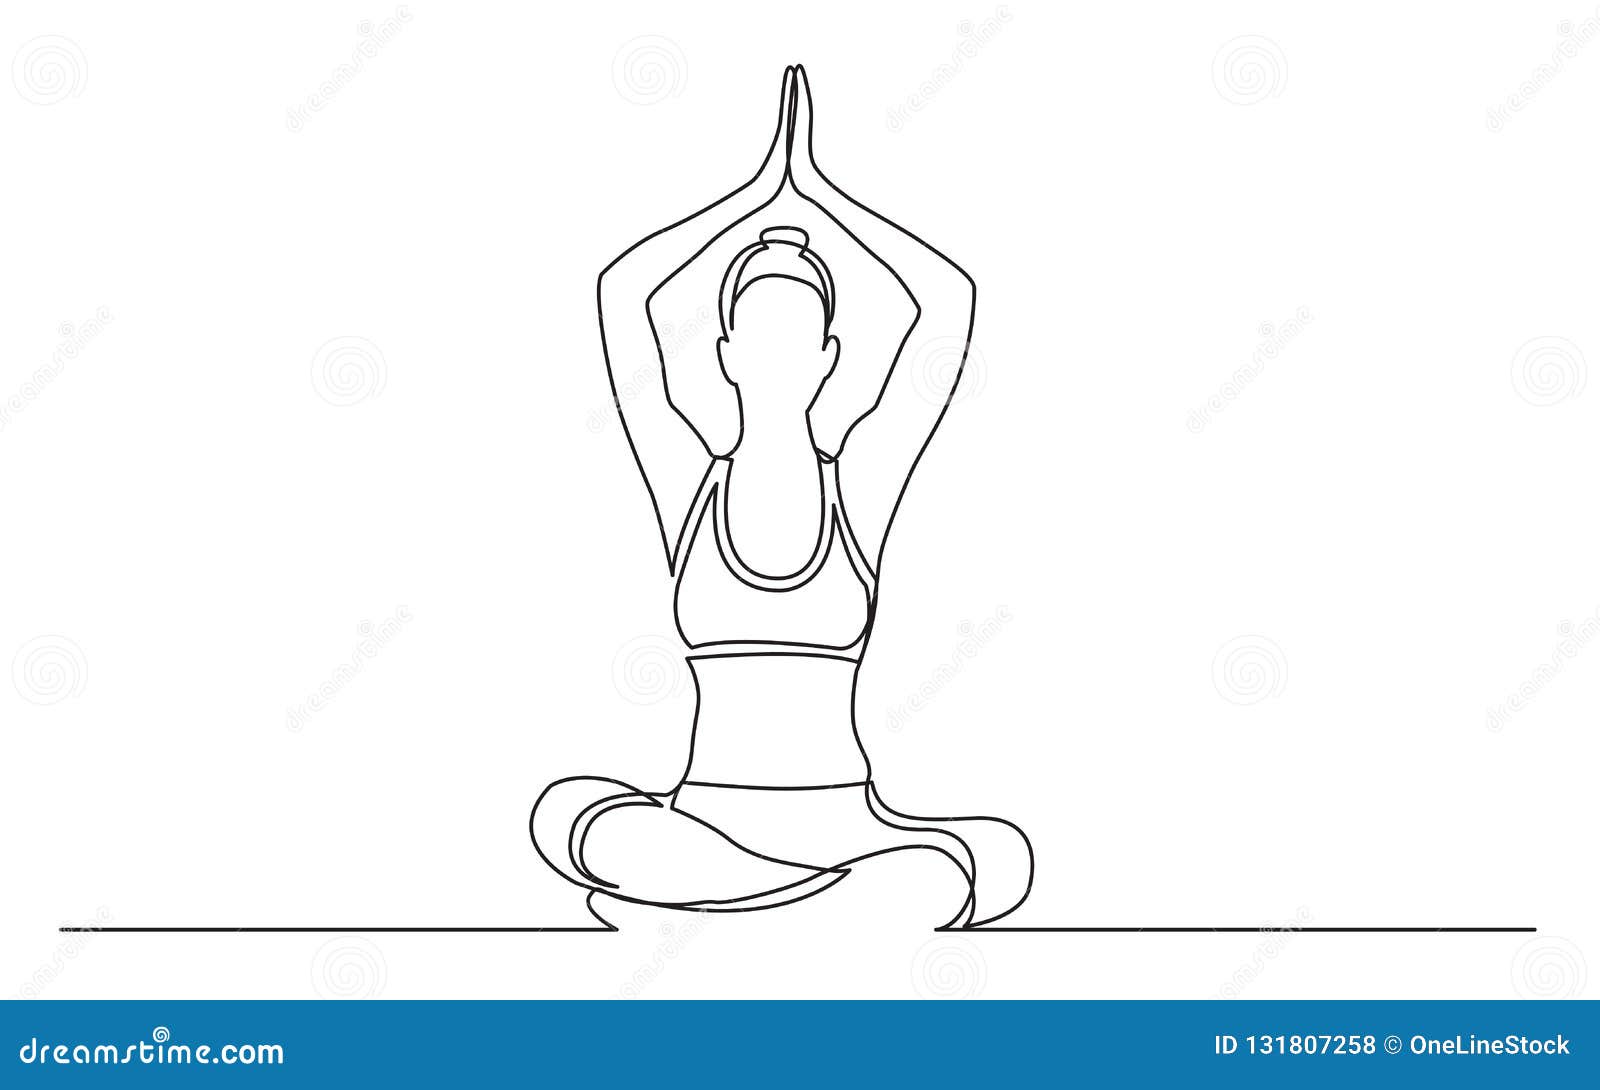 20+ Extremely Abstract line drawing yoga pose Transparent Background Images  Free Download